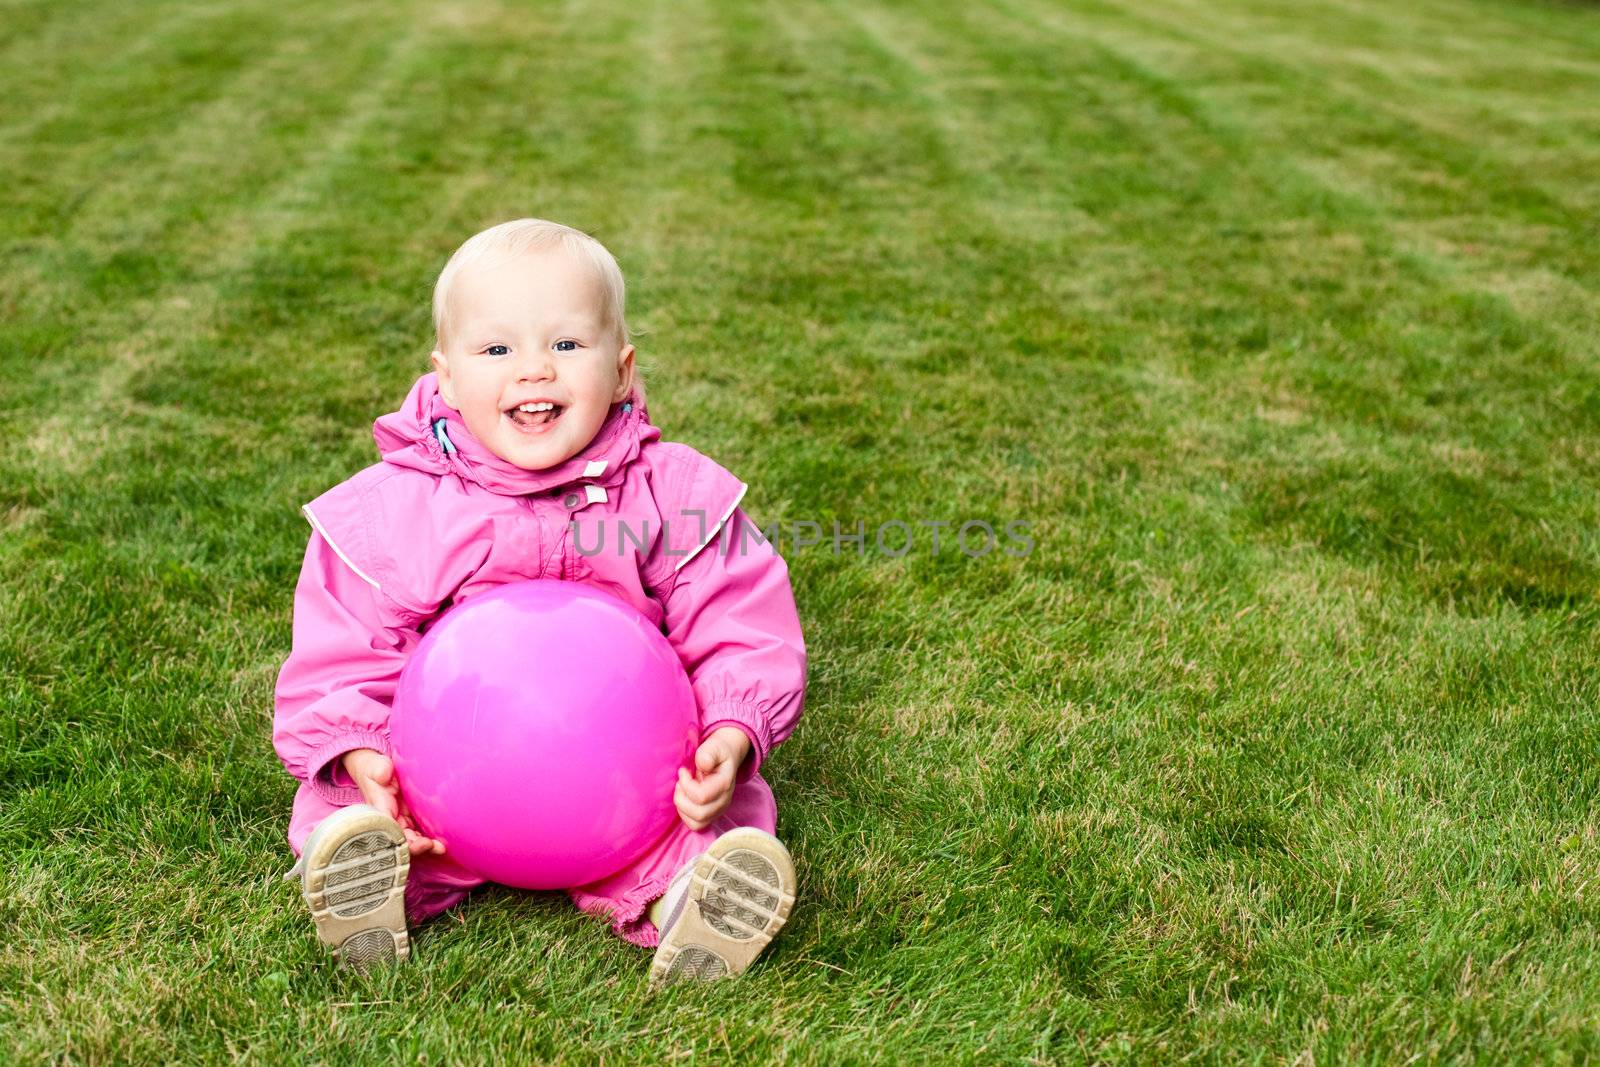 Cute little baby girl wearing pink suit sitting with pink ball on lawn